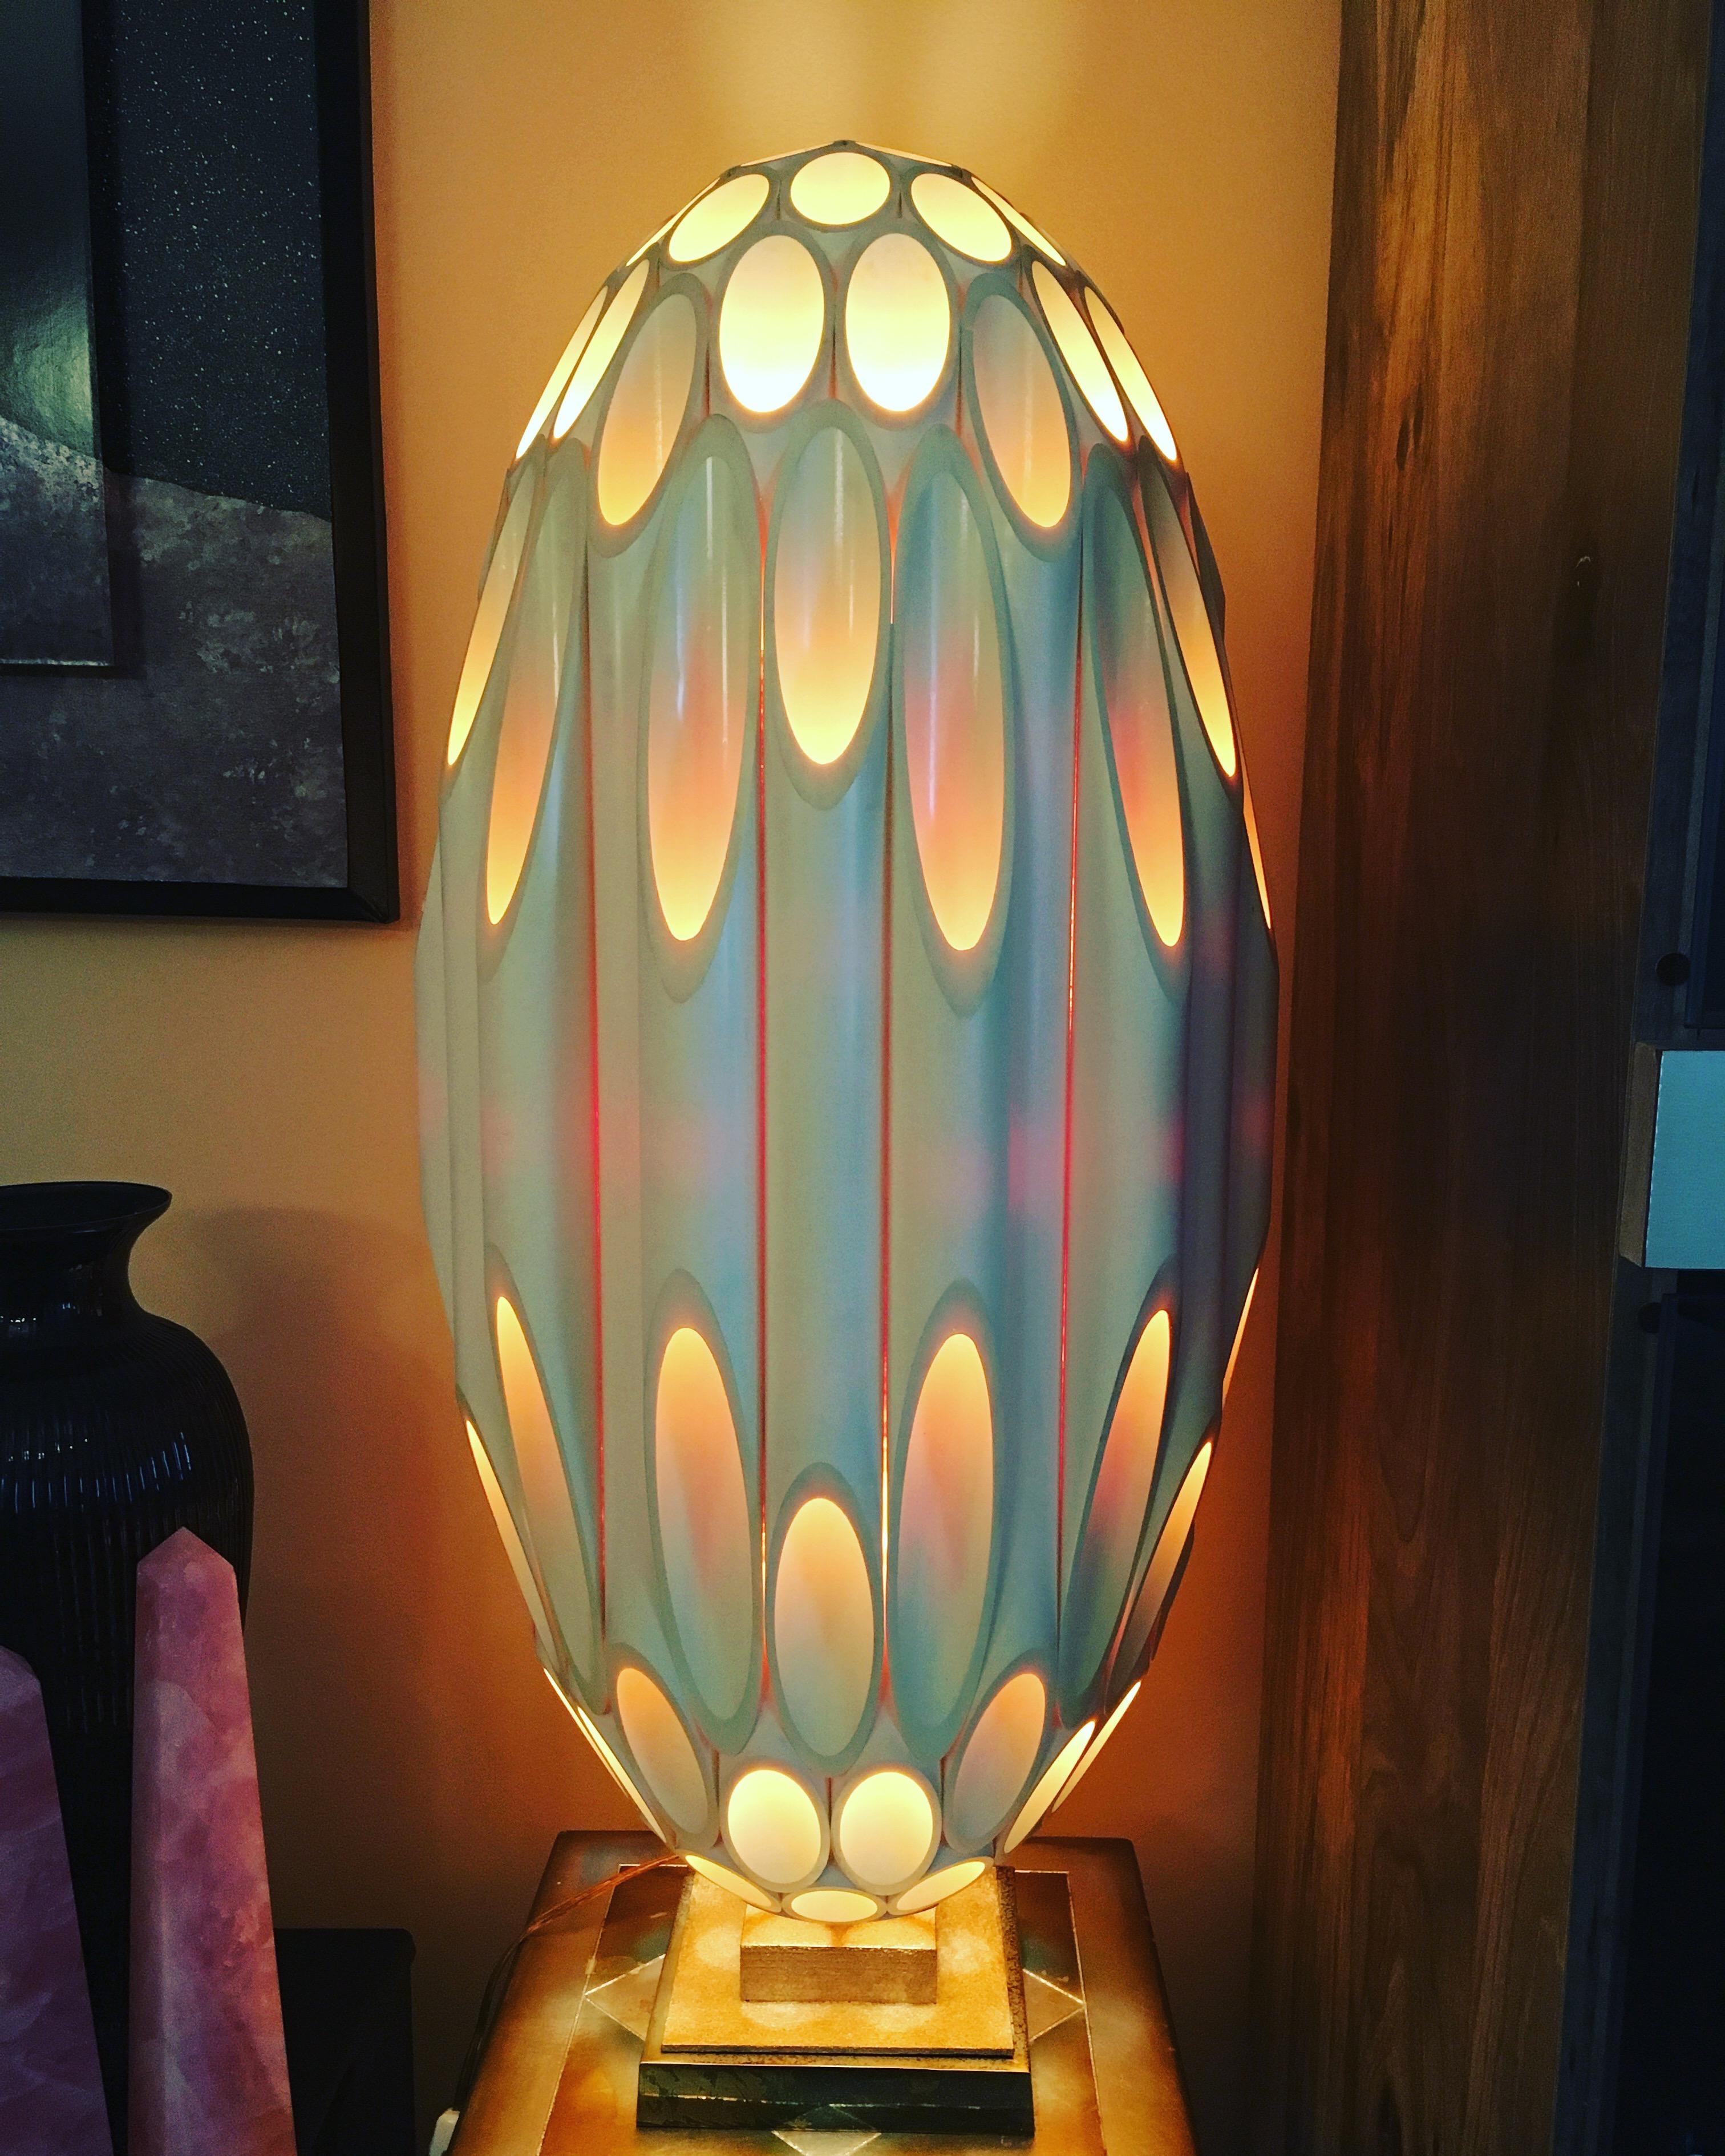 Impressive Roger Rougier Post Modern design table lamp. Fully signed on base and Canadian maple leaf label under base. This is more than just a table lamp, but a statement. Amazing warm display of light when it is lit up. Circa 1970-80. 

Very good